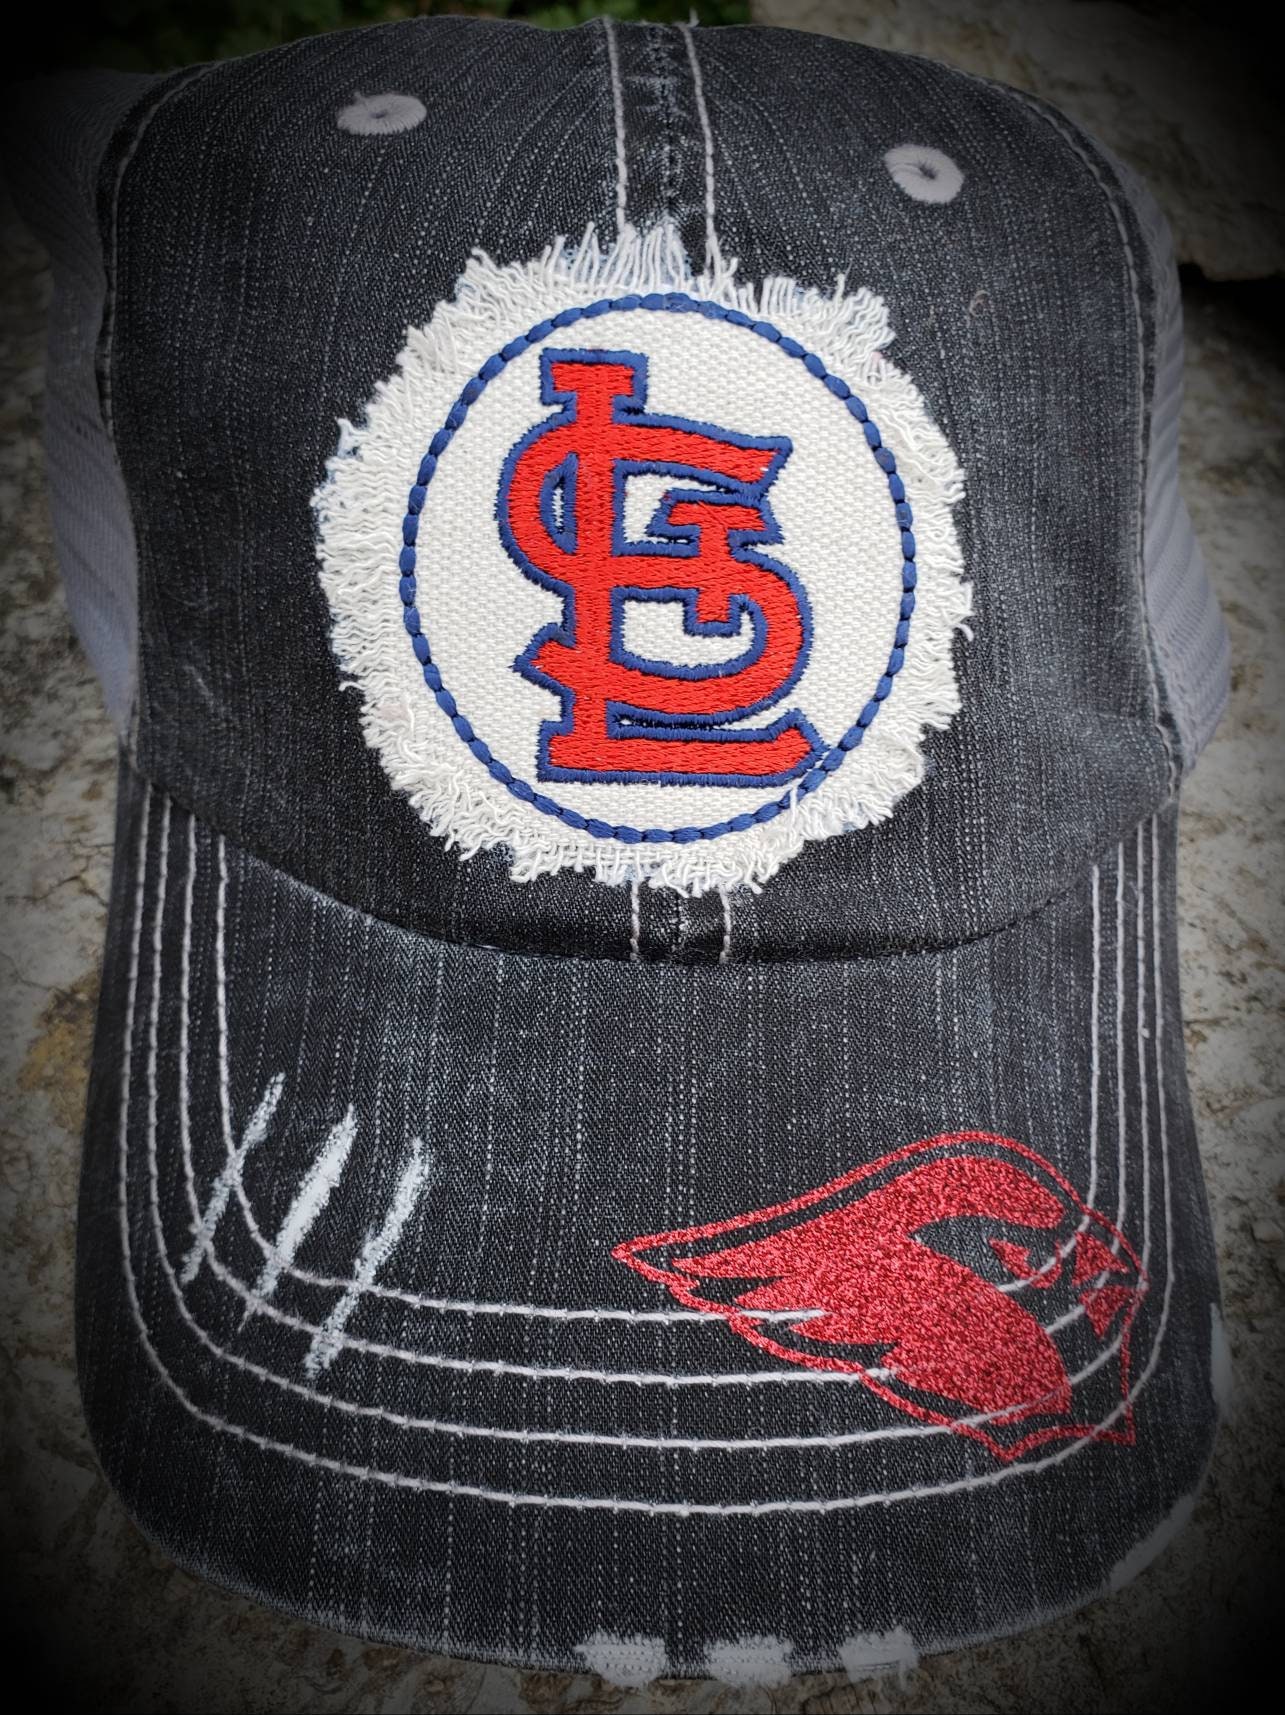 YOUTH adjustable St. louis Cardinals BLINGED ballcap (ages 4-7) or small  head — Hats N Stuff